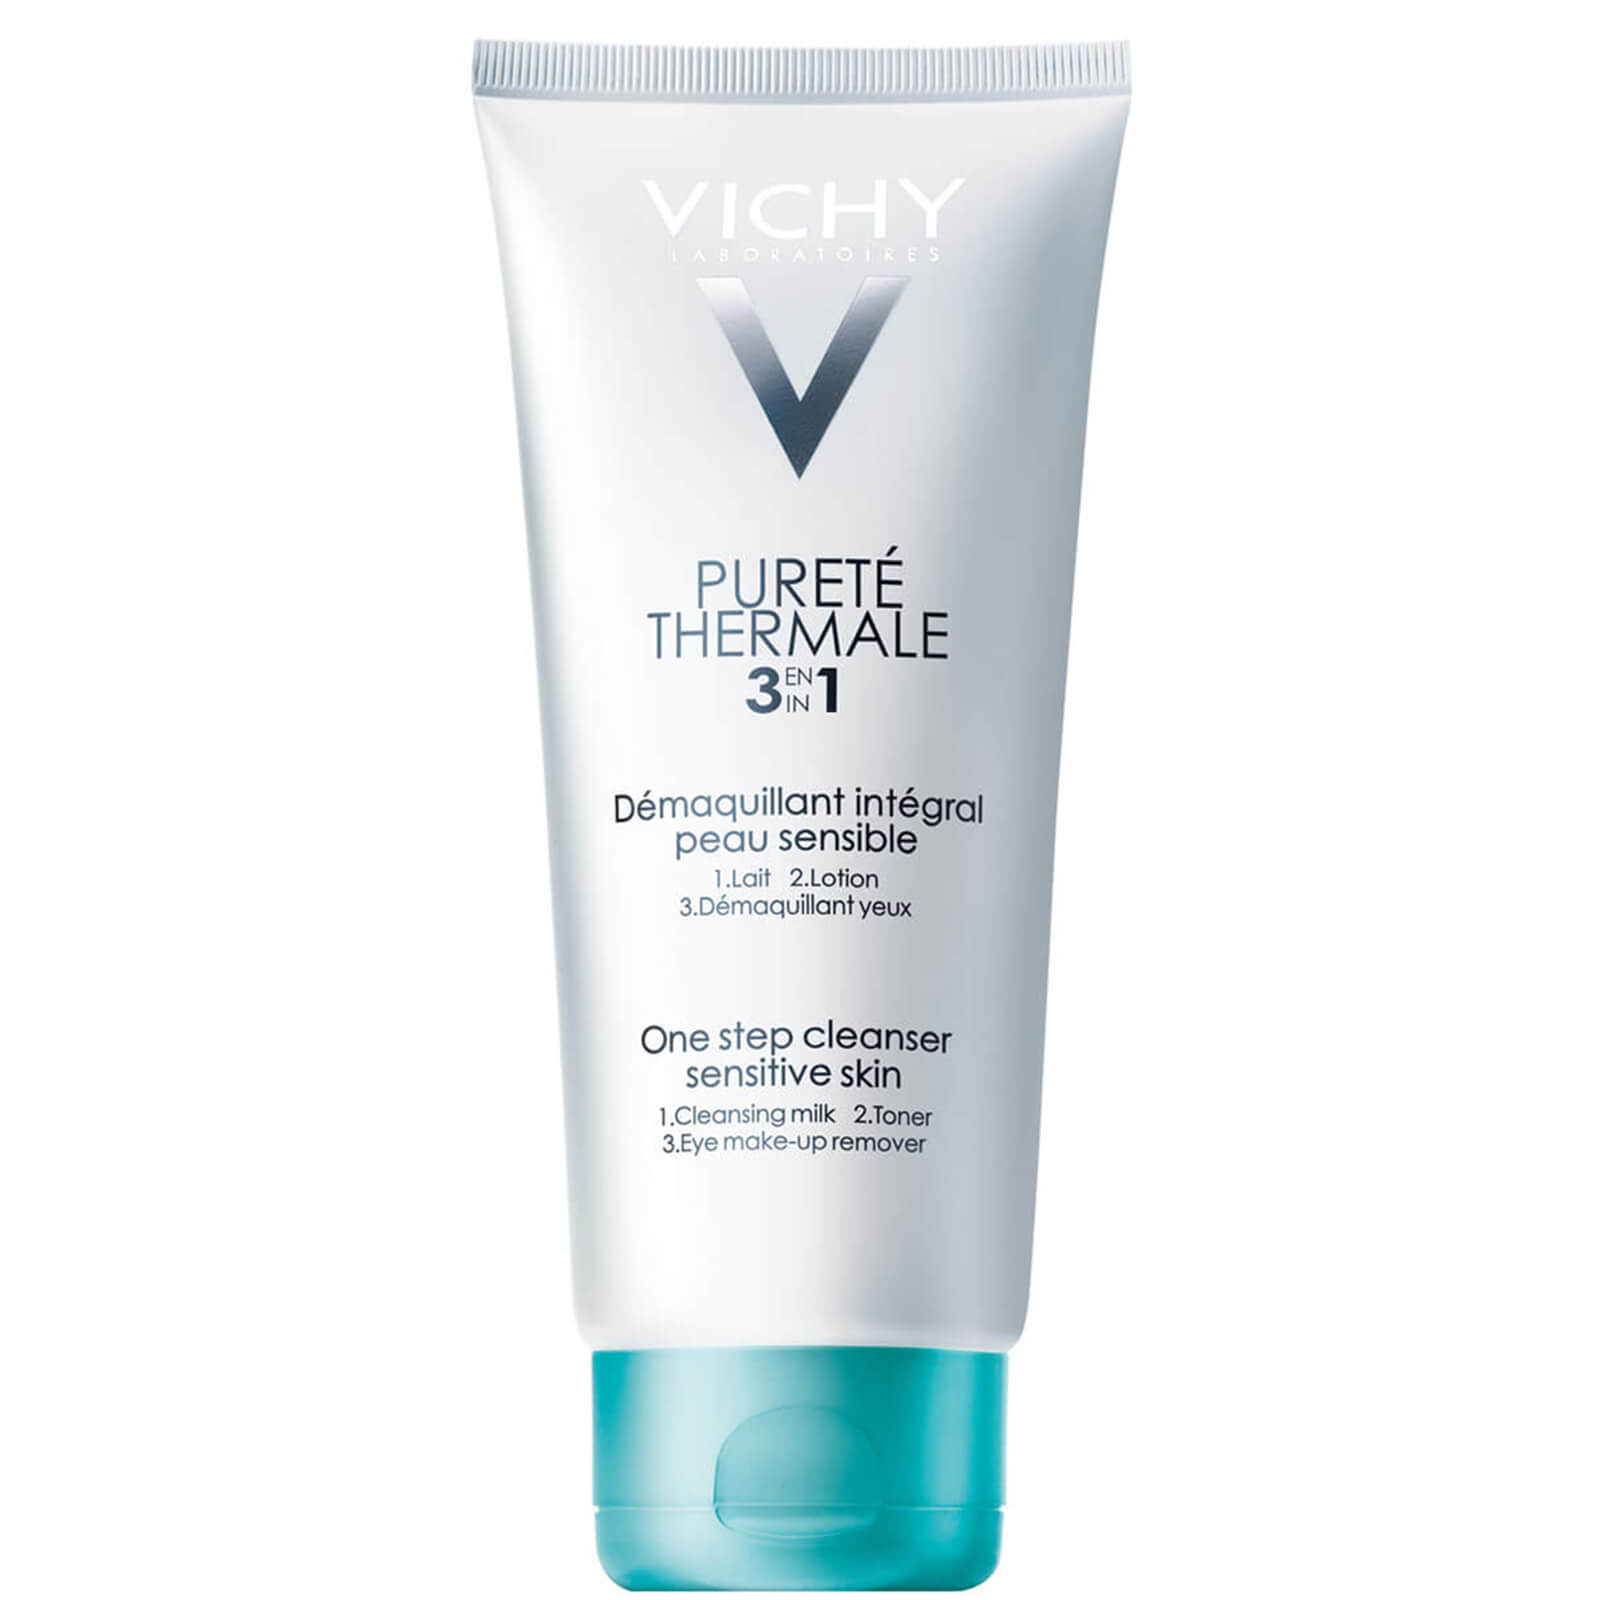 Vichy Pureté Thermale 3-in-1 One Step Cleanser 200ml In White